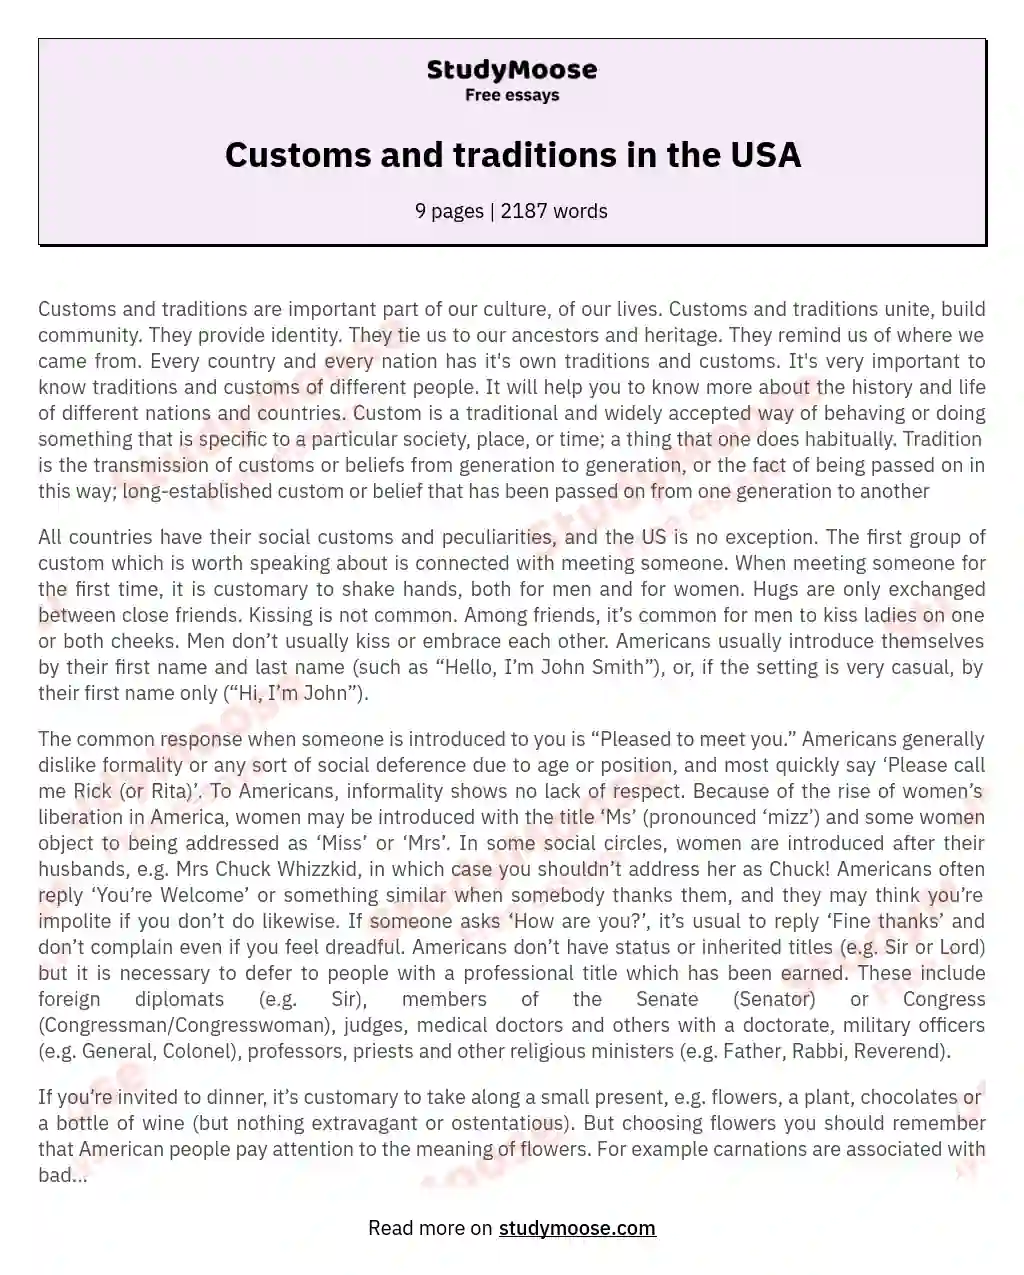 Customs and traditions in the USA essay